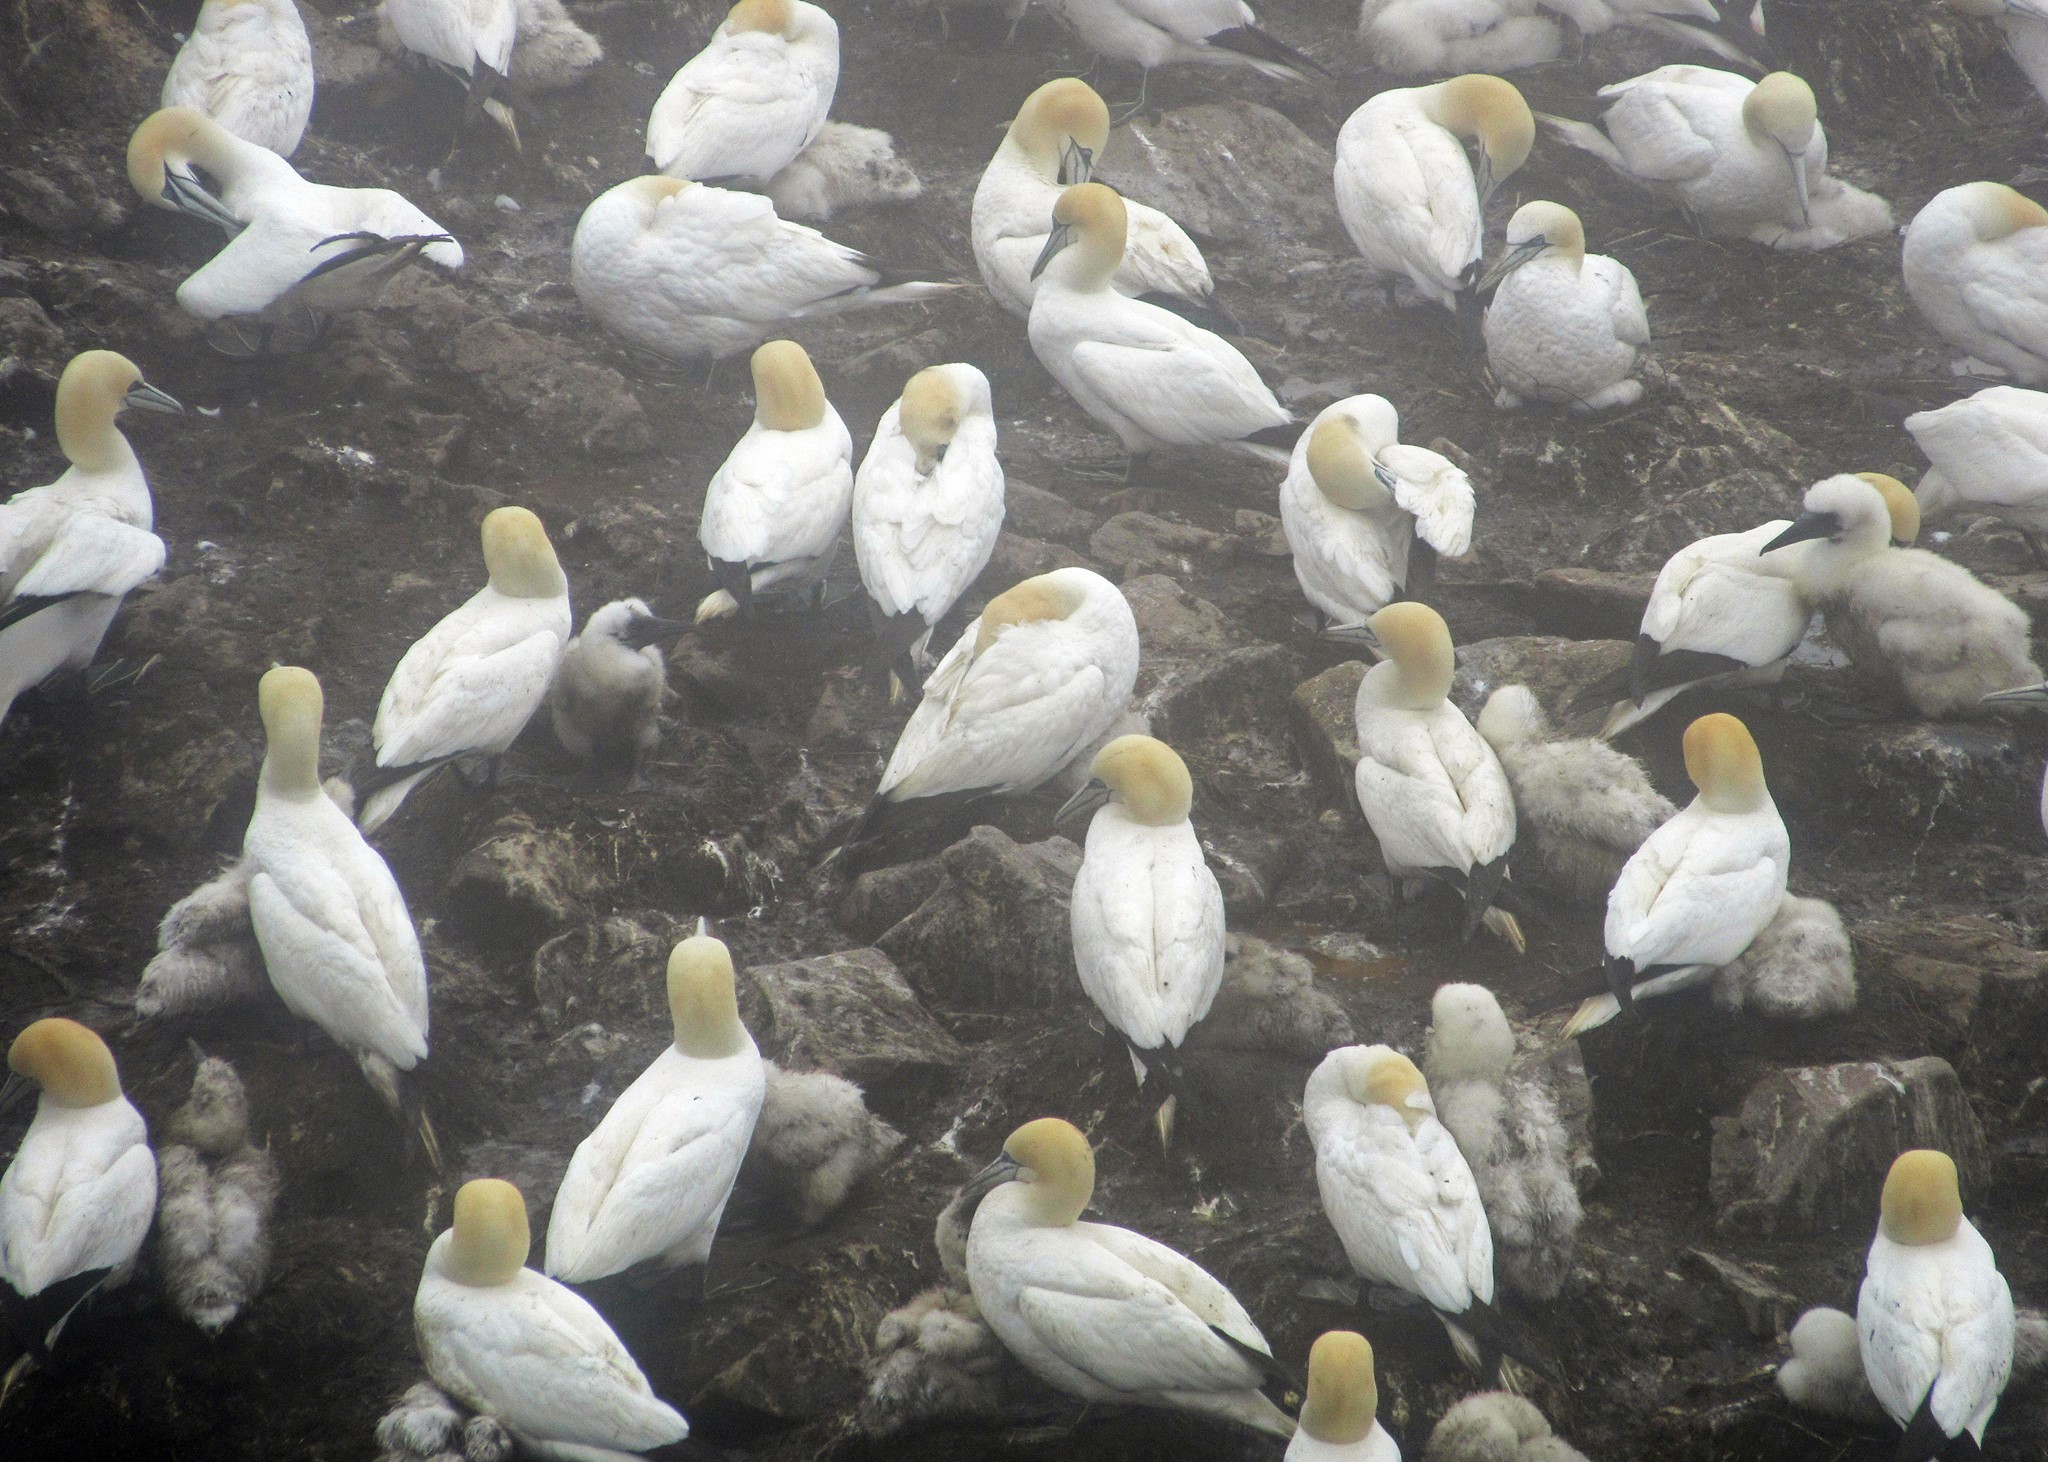 A Northern Gannet nesting colony at an Important Bird Area